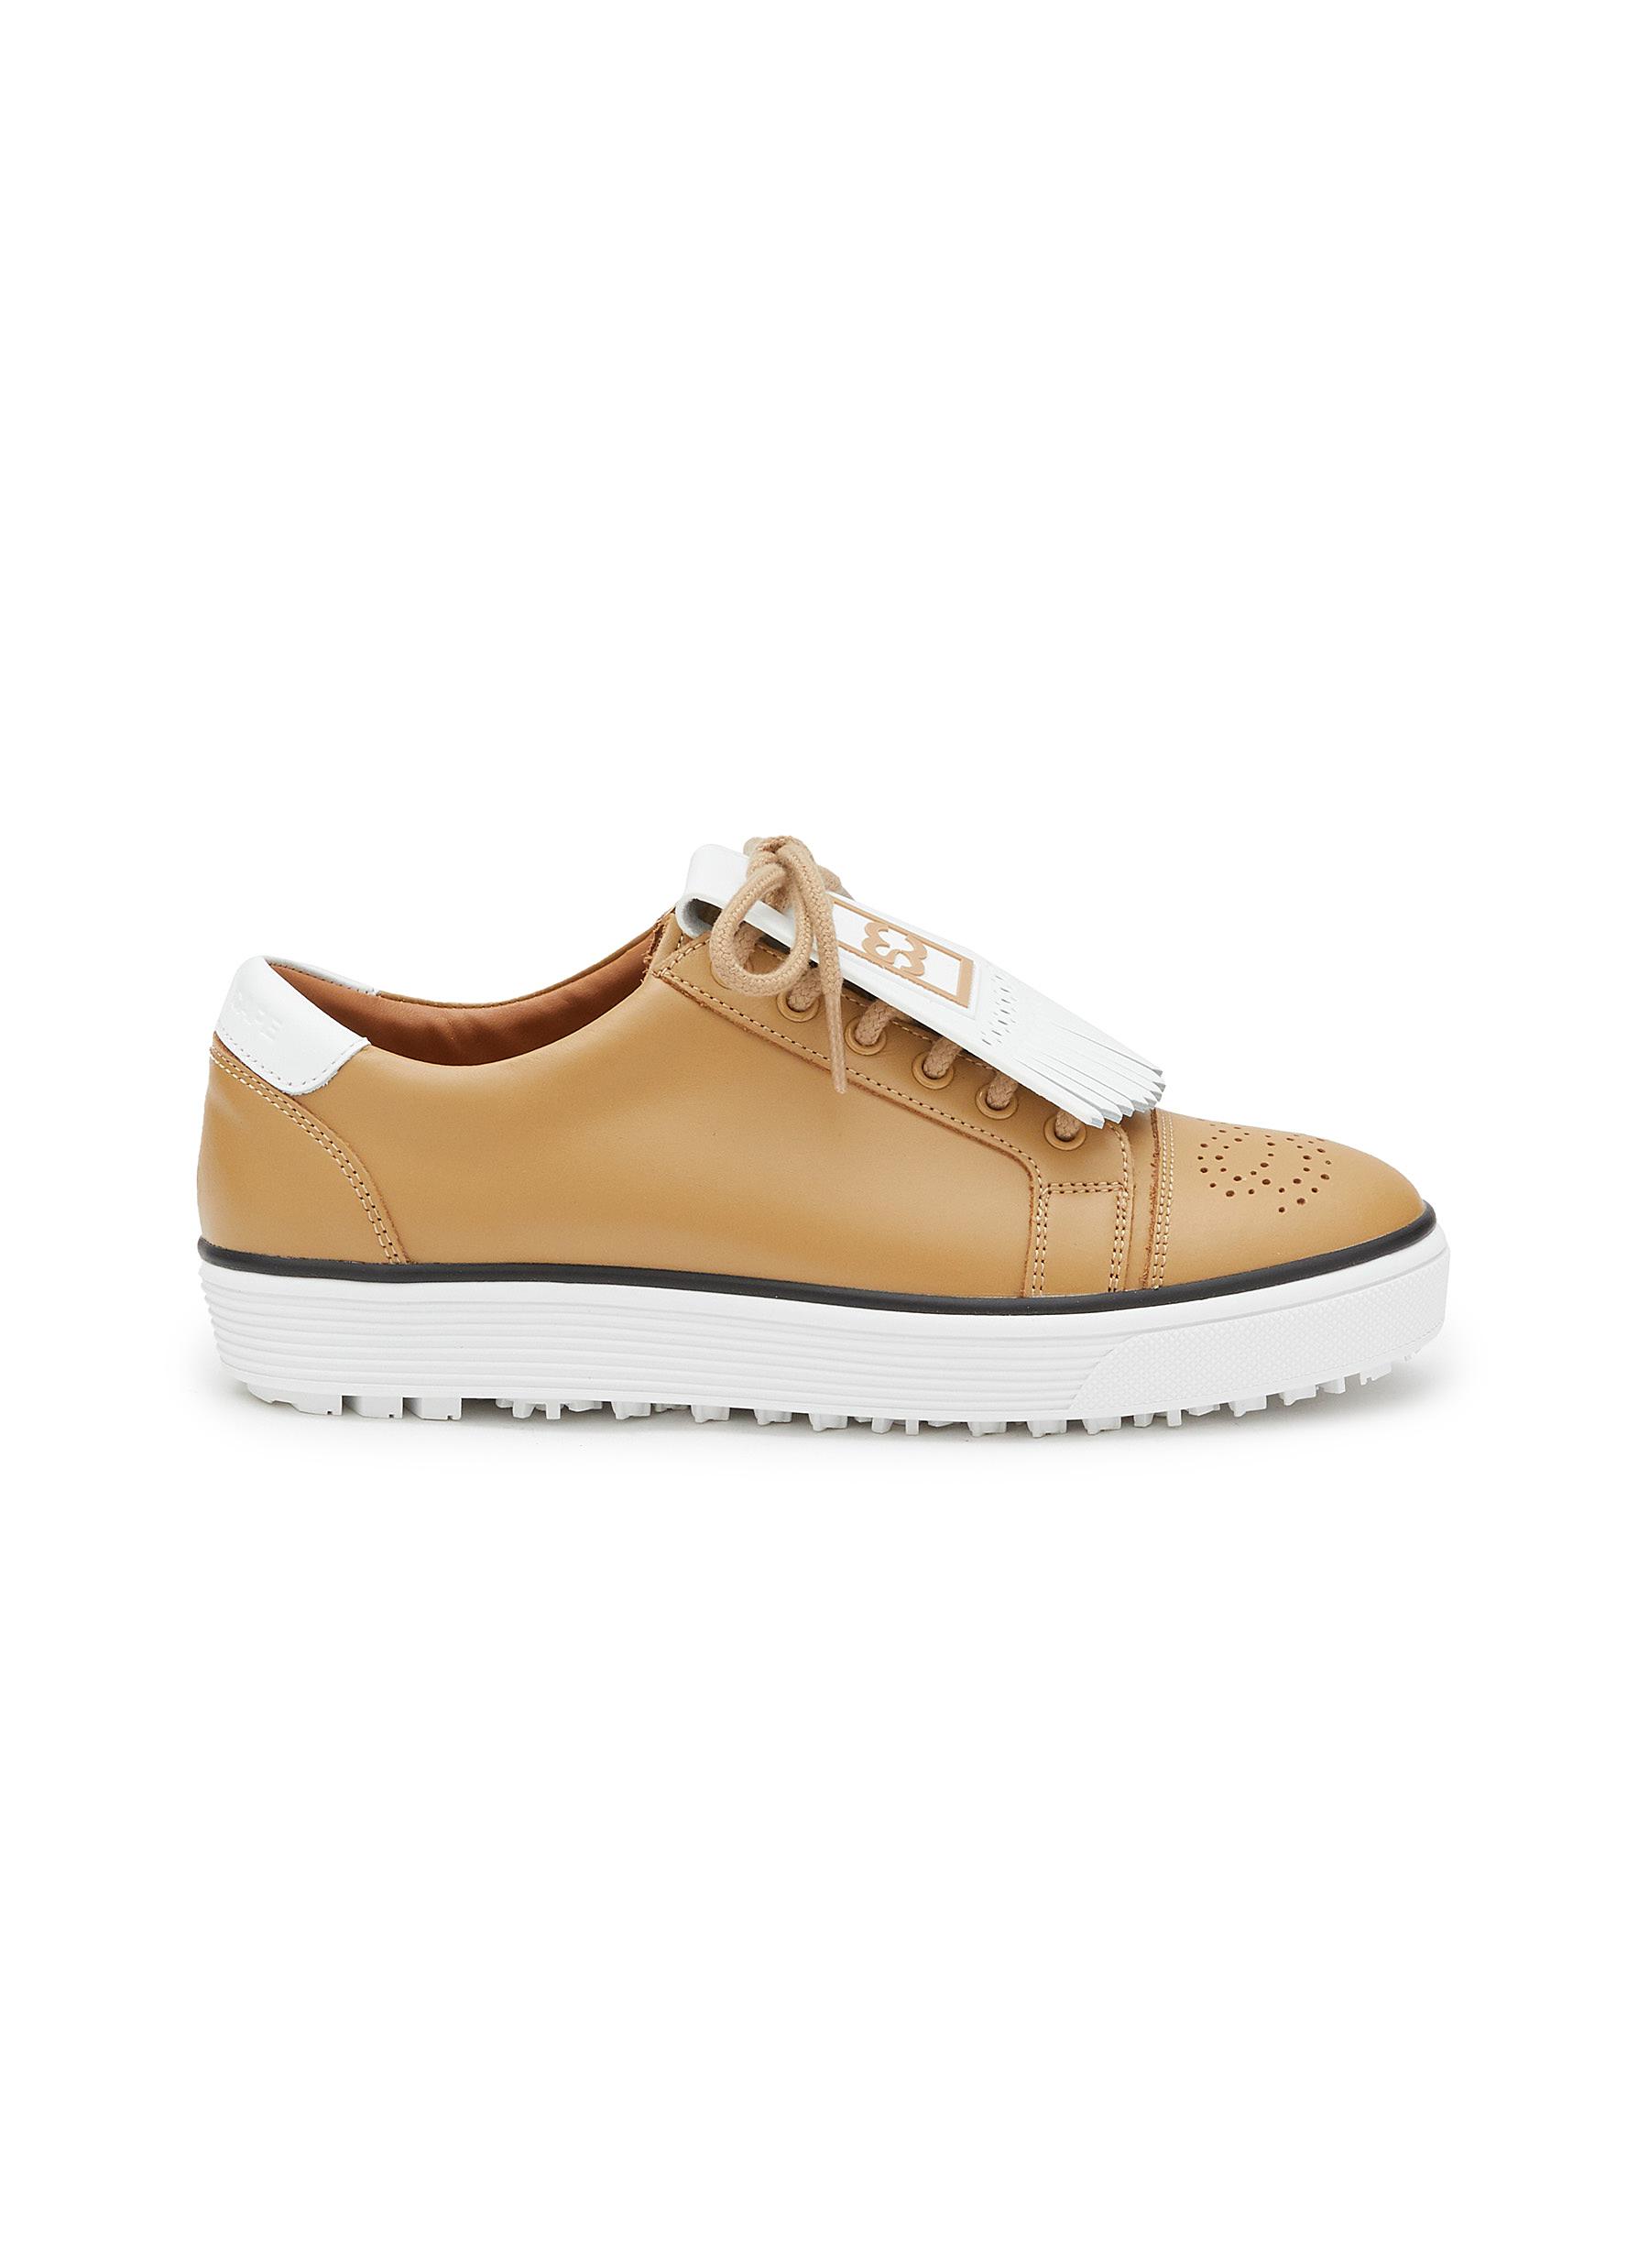 Southcape Removable Tassels Leather Sneakers In Neutral